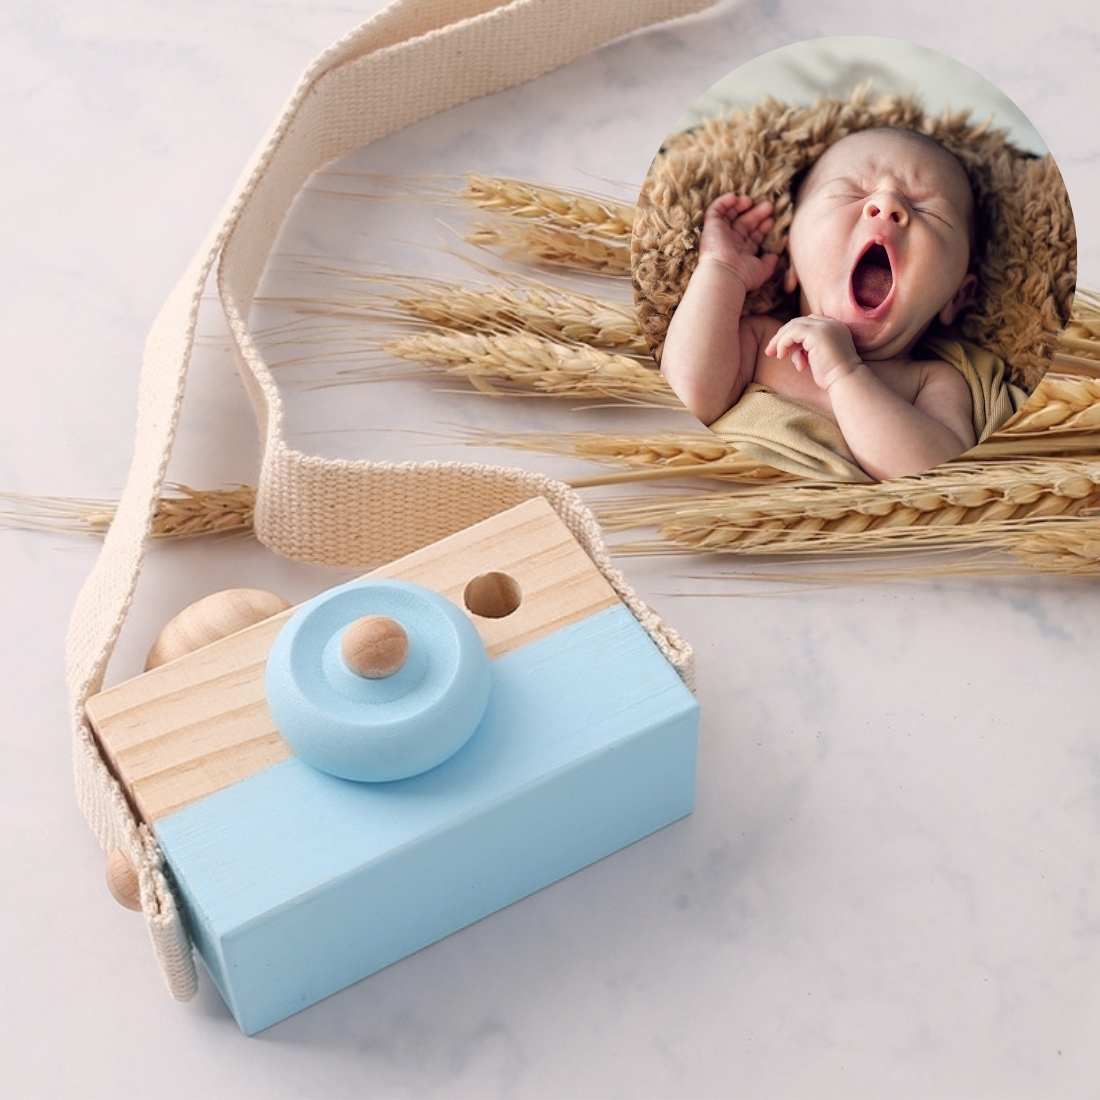 New Baby/Toddler Wooden Camera Toy - Pink & Blue Baby Shop - Review